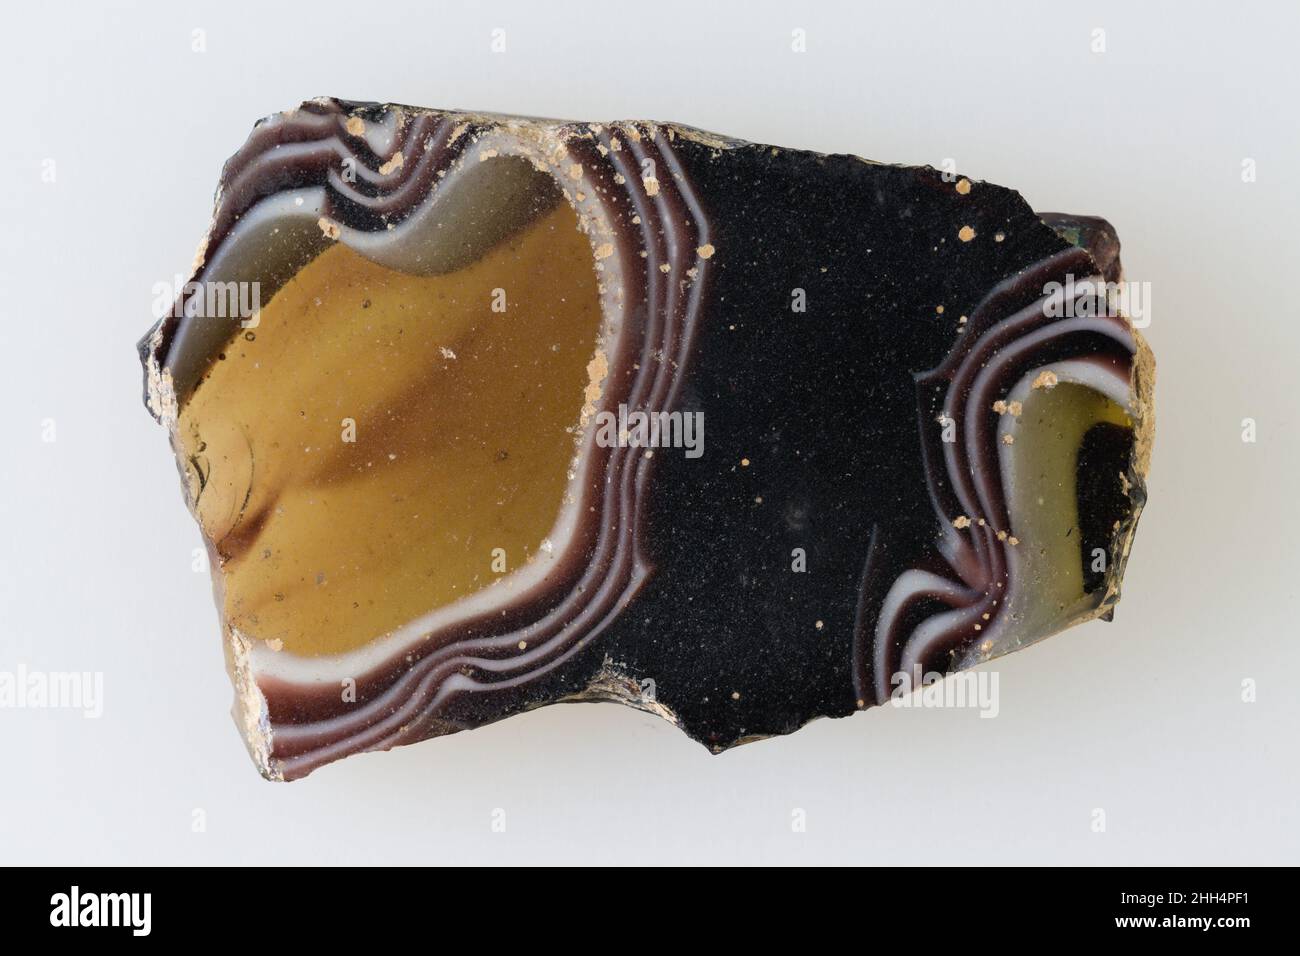 Wall revetment, agate pattern 200 BC–100 AD Ptolemaic Period–Roman Period Glass plaques imitating expensive marble or stones were used as wall coverings.. Wall revetment, agate pattern. 200 BC–100 AD. Glass. Ptolemaic Period–Roman Period. From Egypt Stock Photo